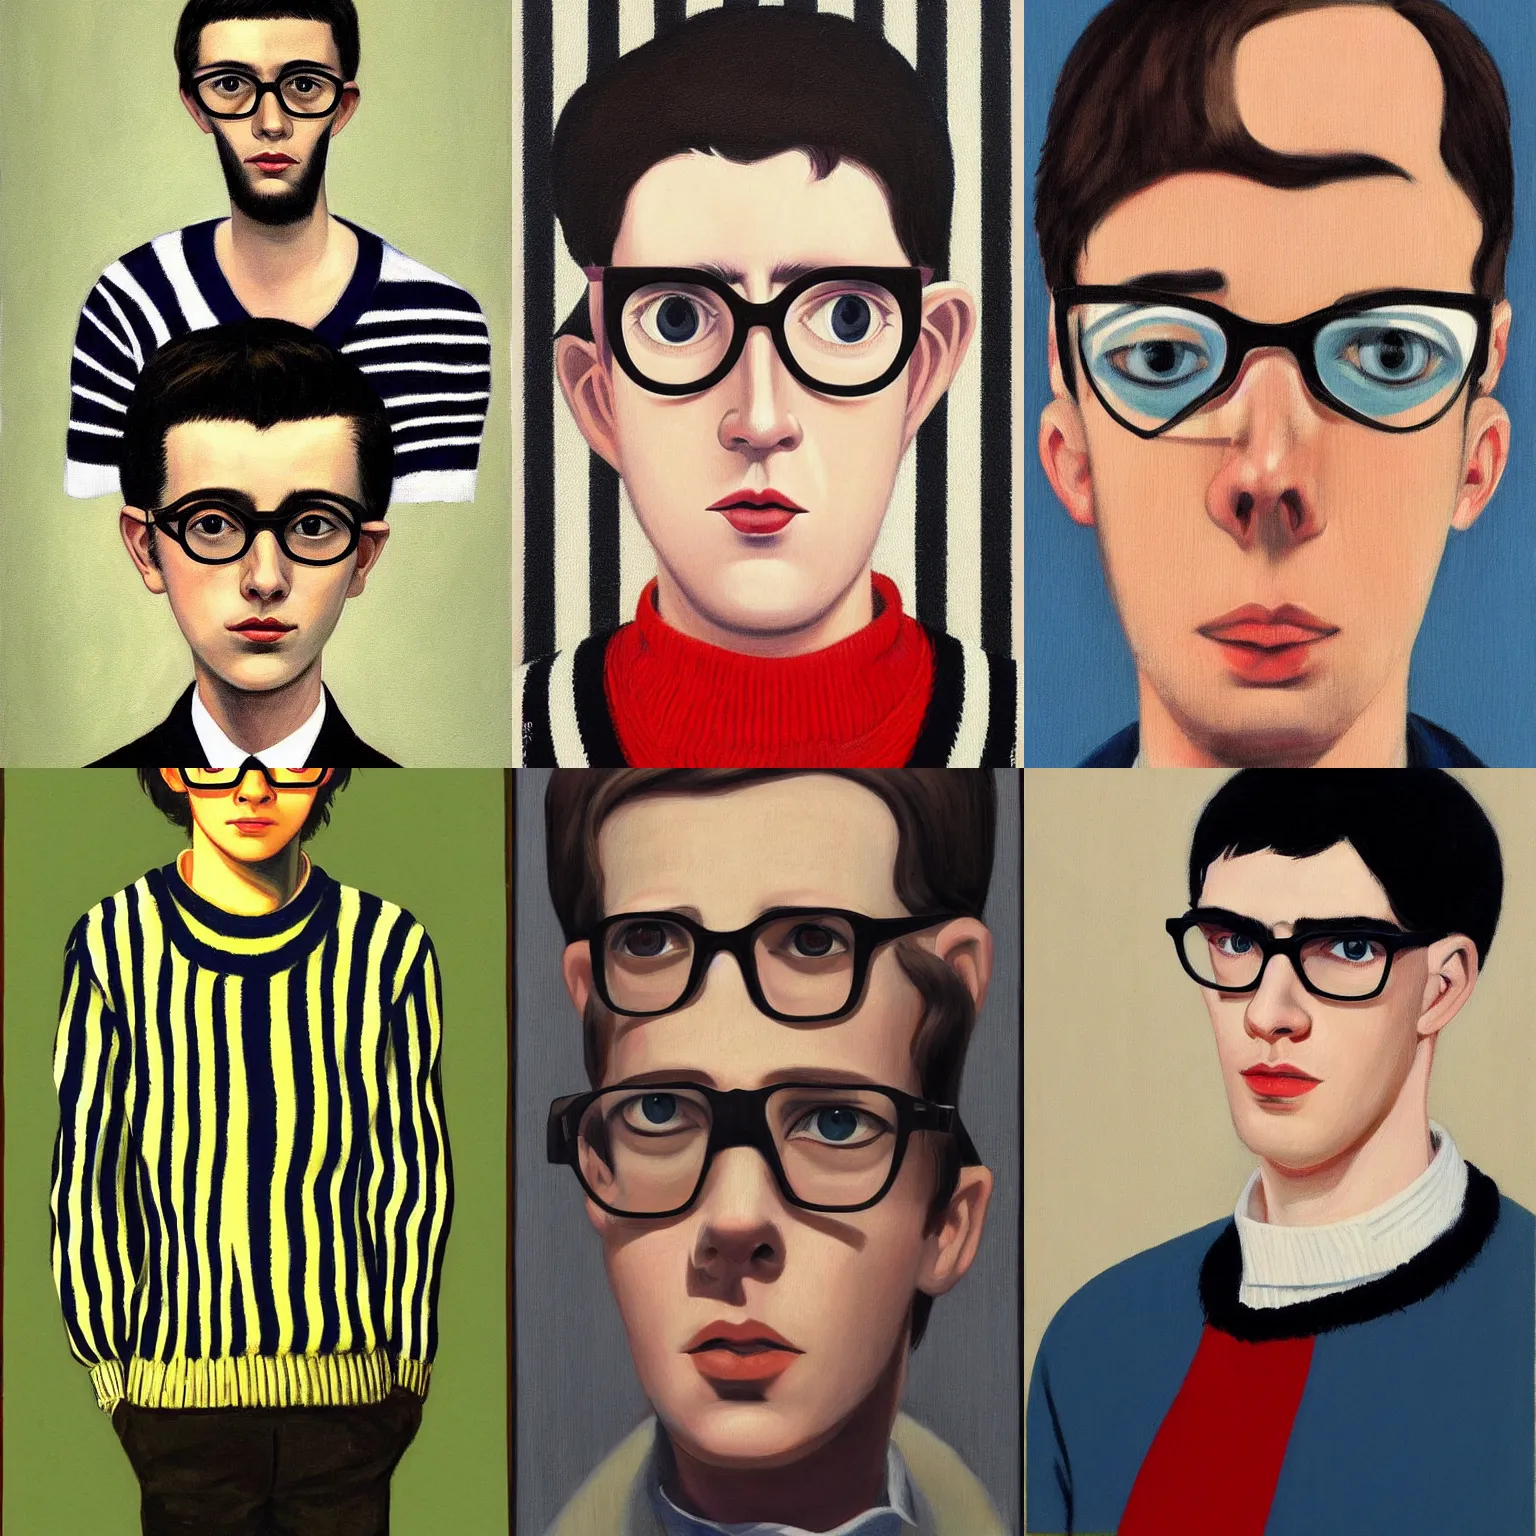 Prompt: a painting of a man wearing glasses and a striped sweater featured on deviantart by Margaret Keane 1960s ilya kuvshinov studio portrait de stijl a character portrait